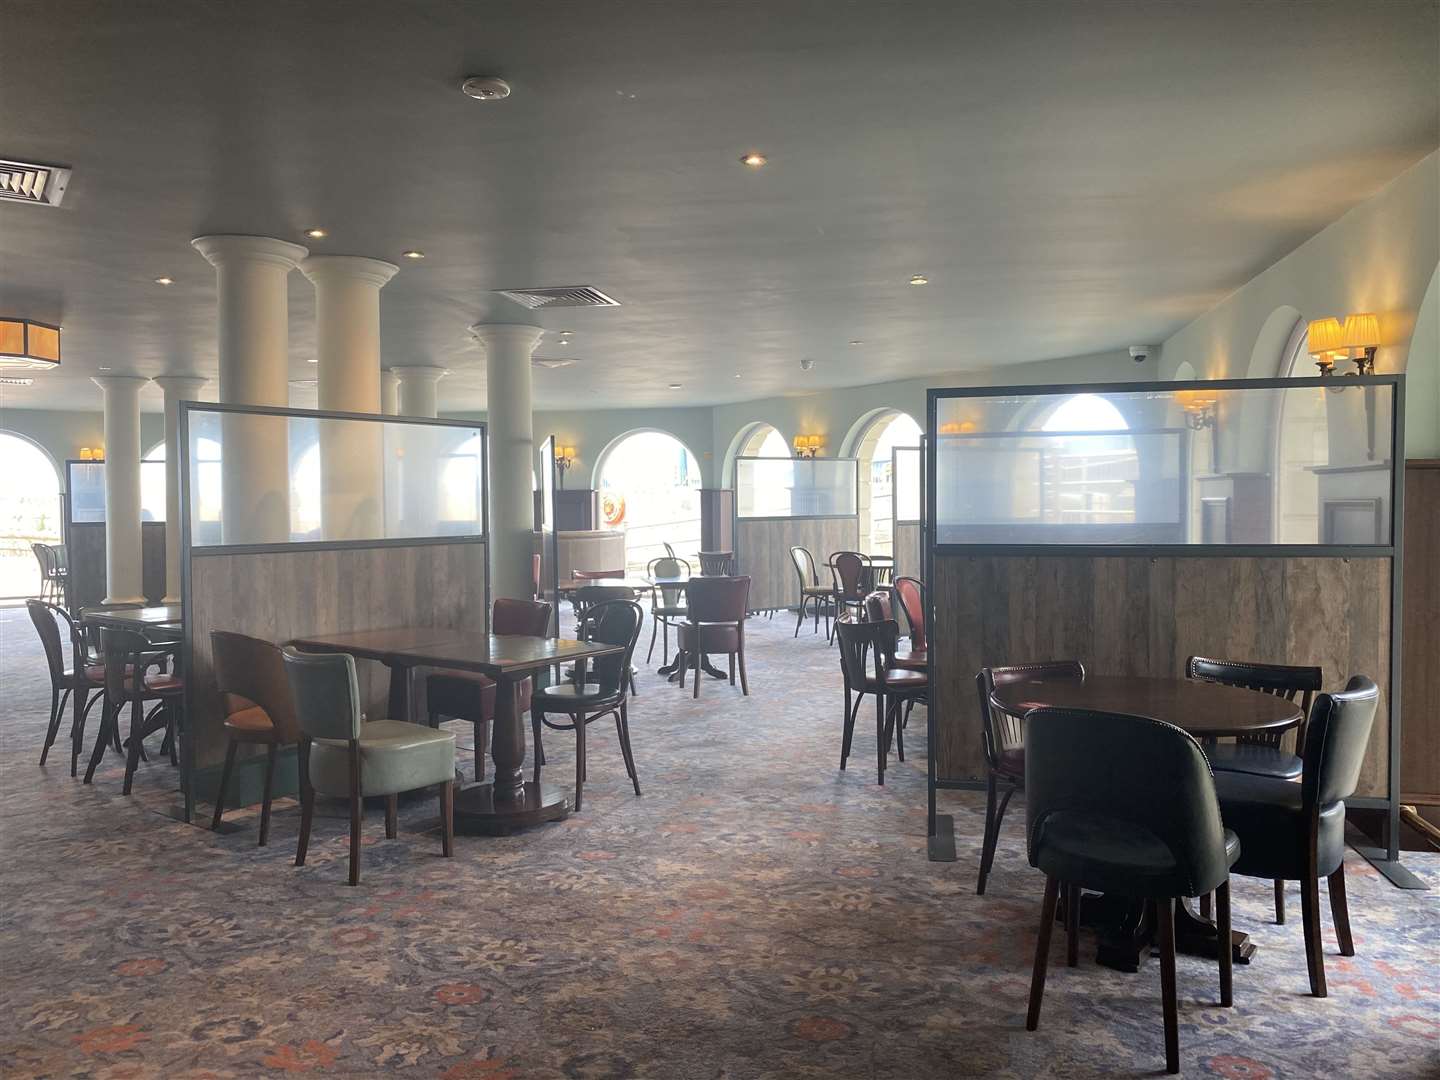 Royal Victoria Pavilion, Ramsgate's Wetherspoons, welcomed back customers in July but partitions had to be added to allow for social distancing